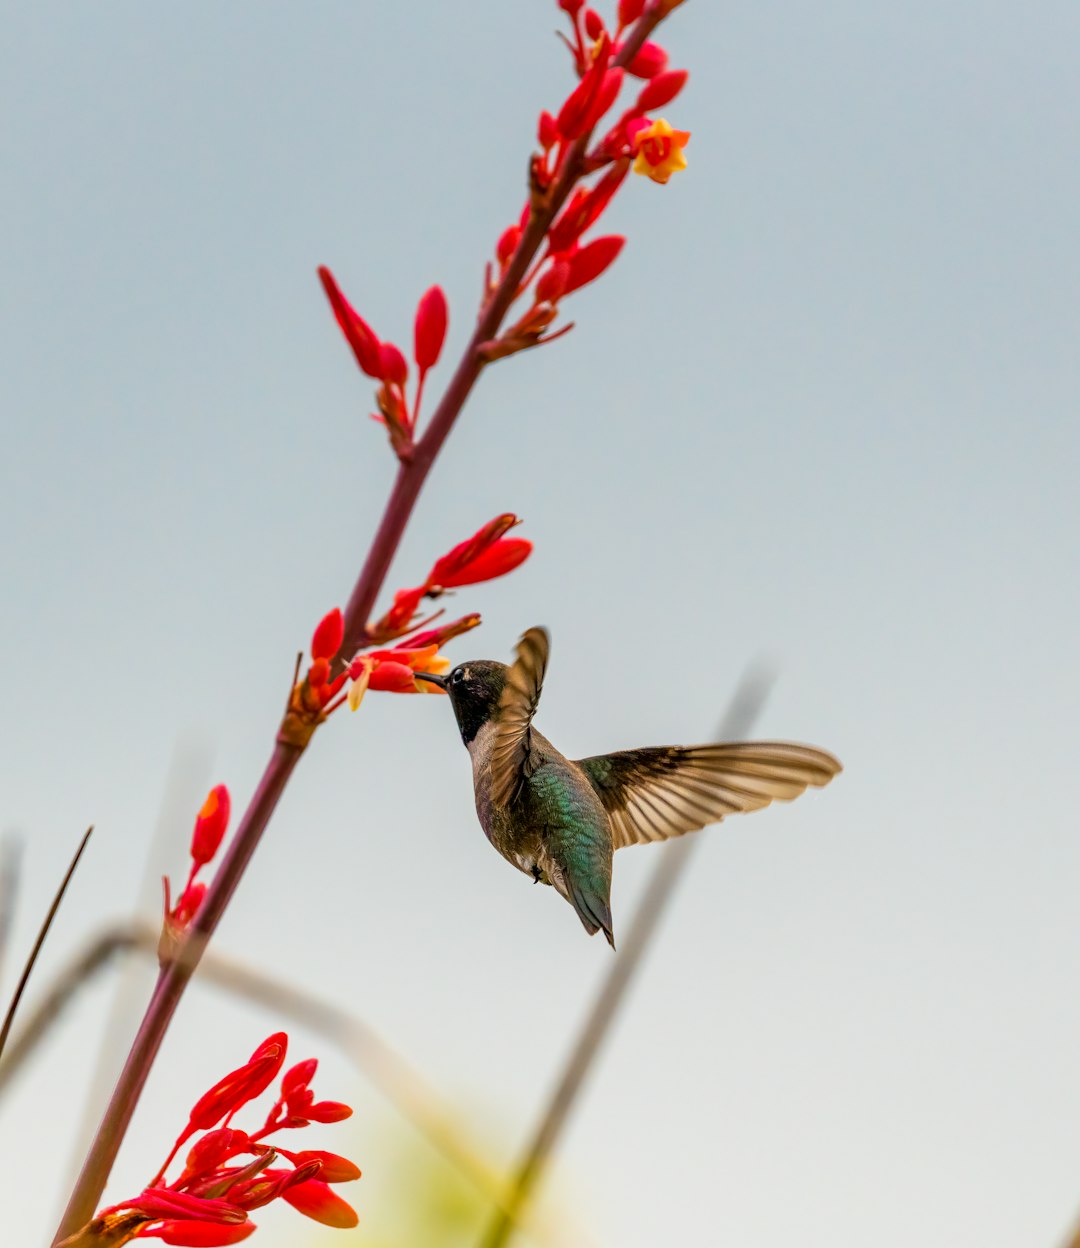 green and brown humming bird flying during daytime